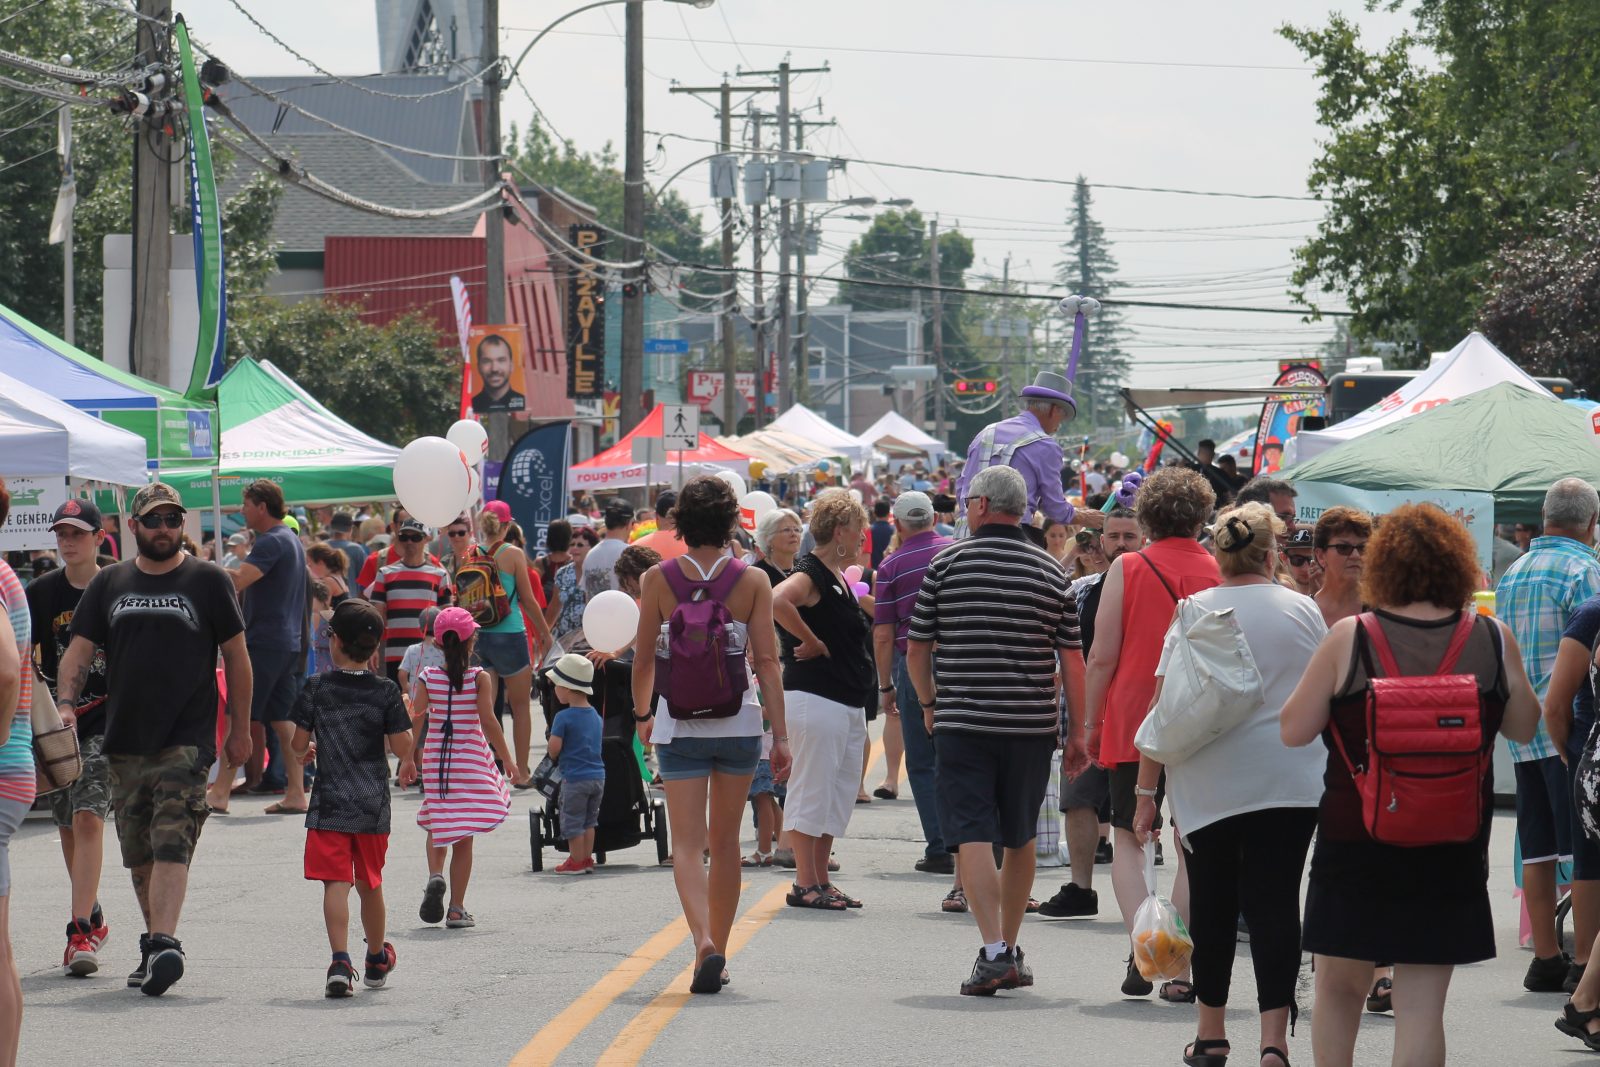 The sun shines on Lennoxville  for 9th annual street fest